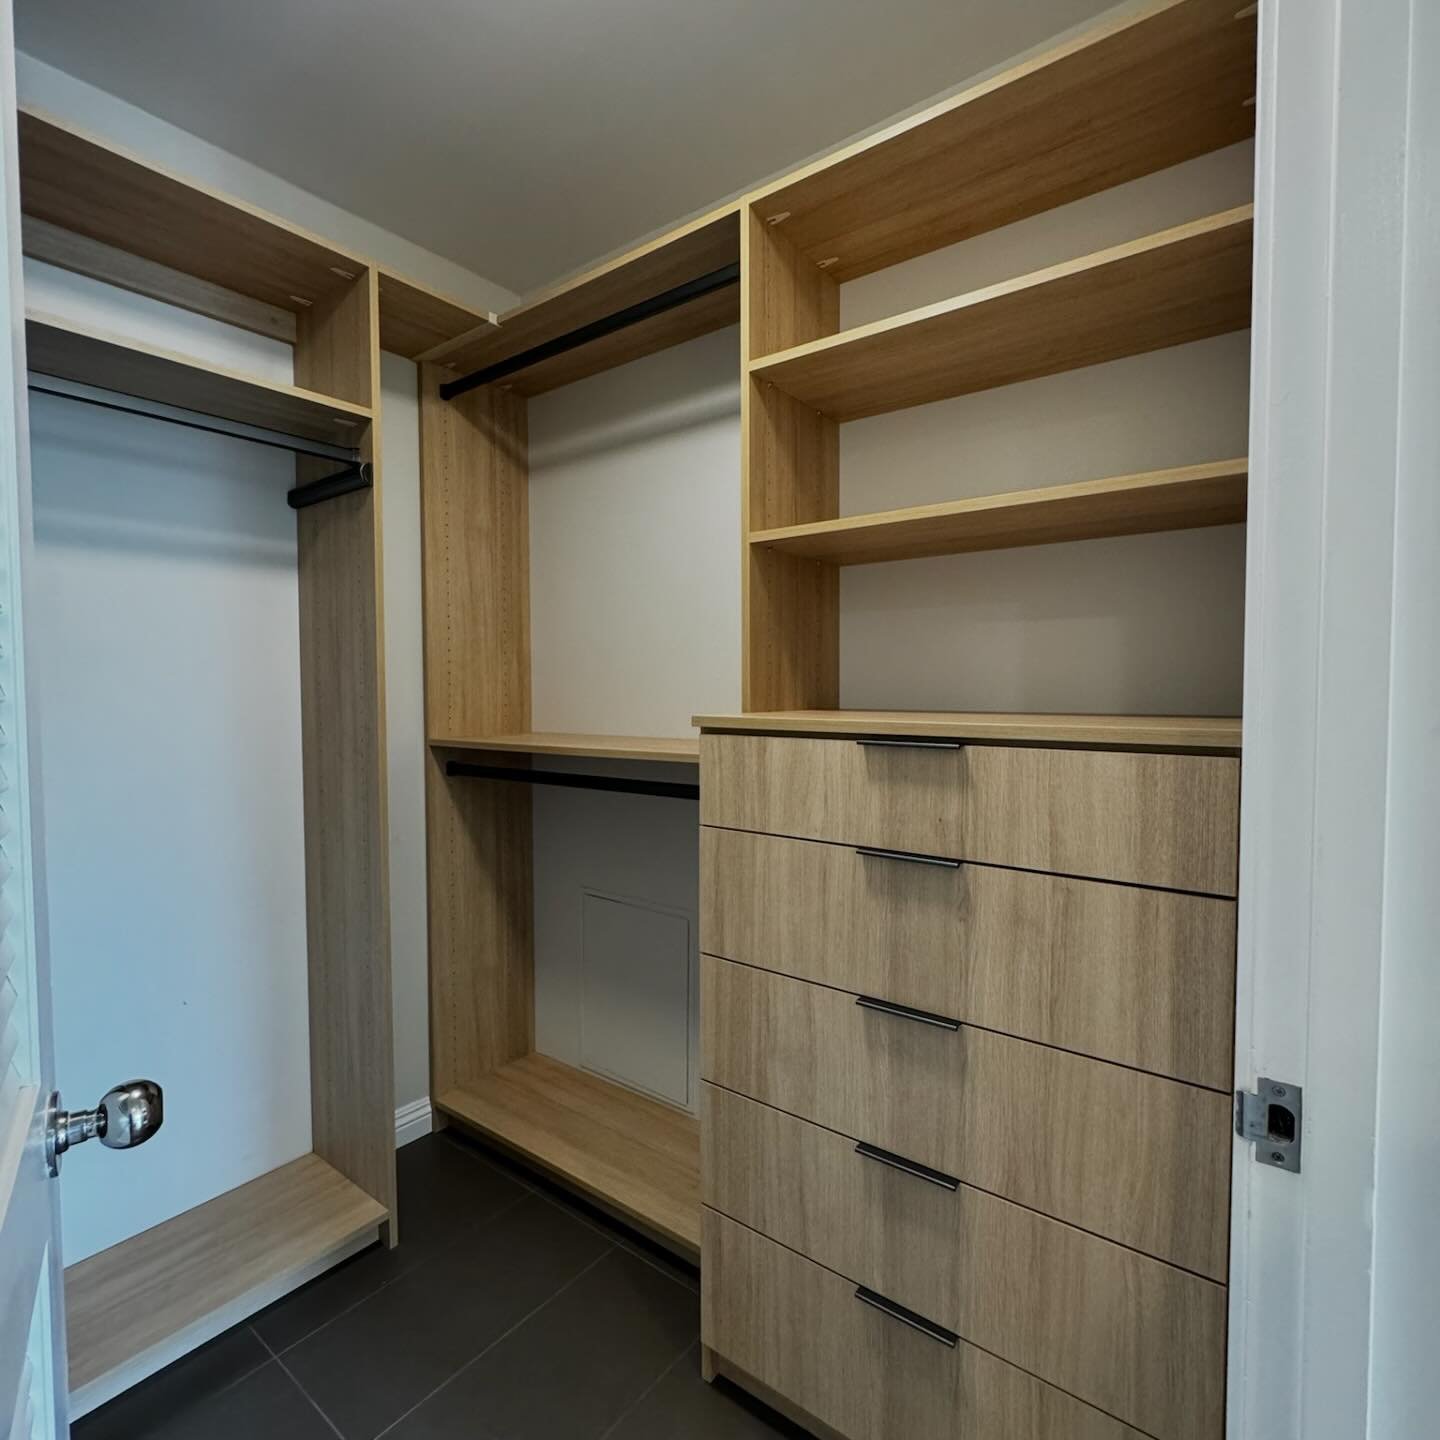 Maximizing storage in a condo can be a challenge but making it work in odd and angled condo spaces are tricky.  These closet spaces had to be custom due to the existing structure and obstacles, and built with the same material as the custom cabinetry